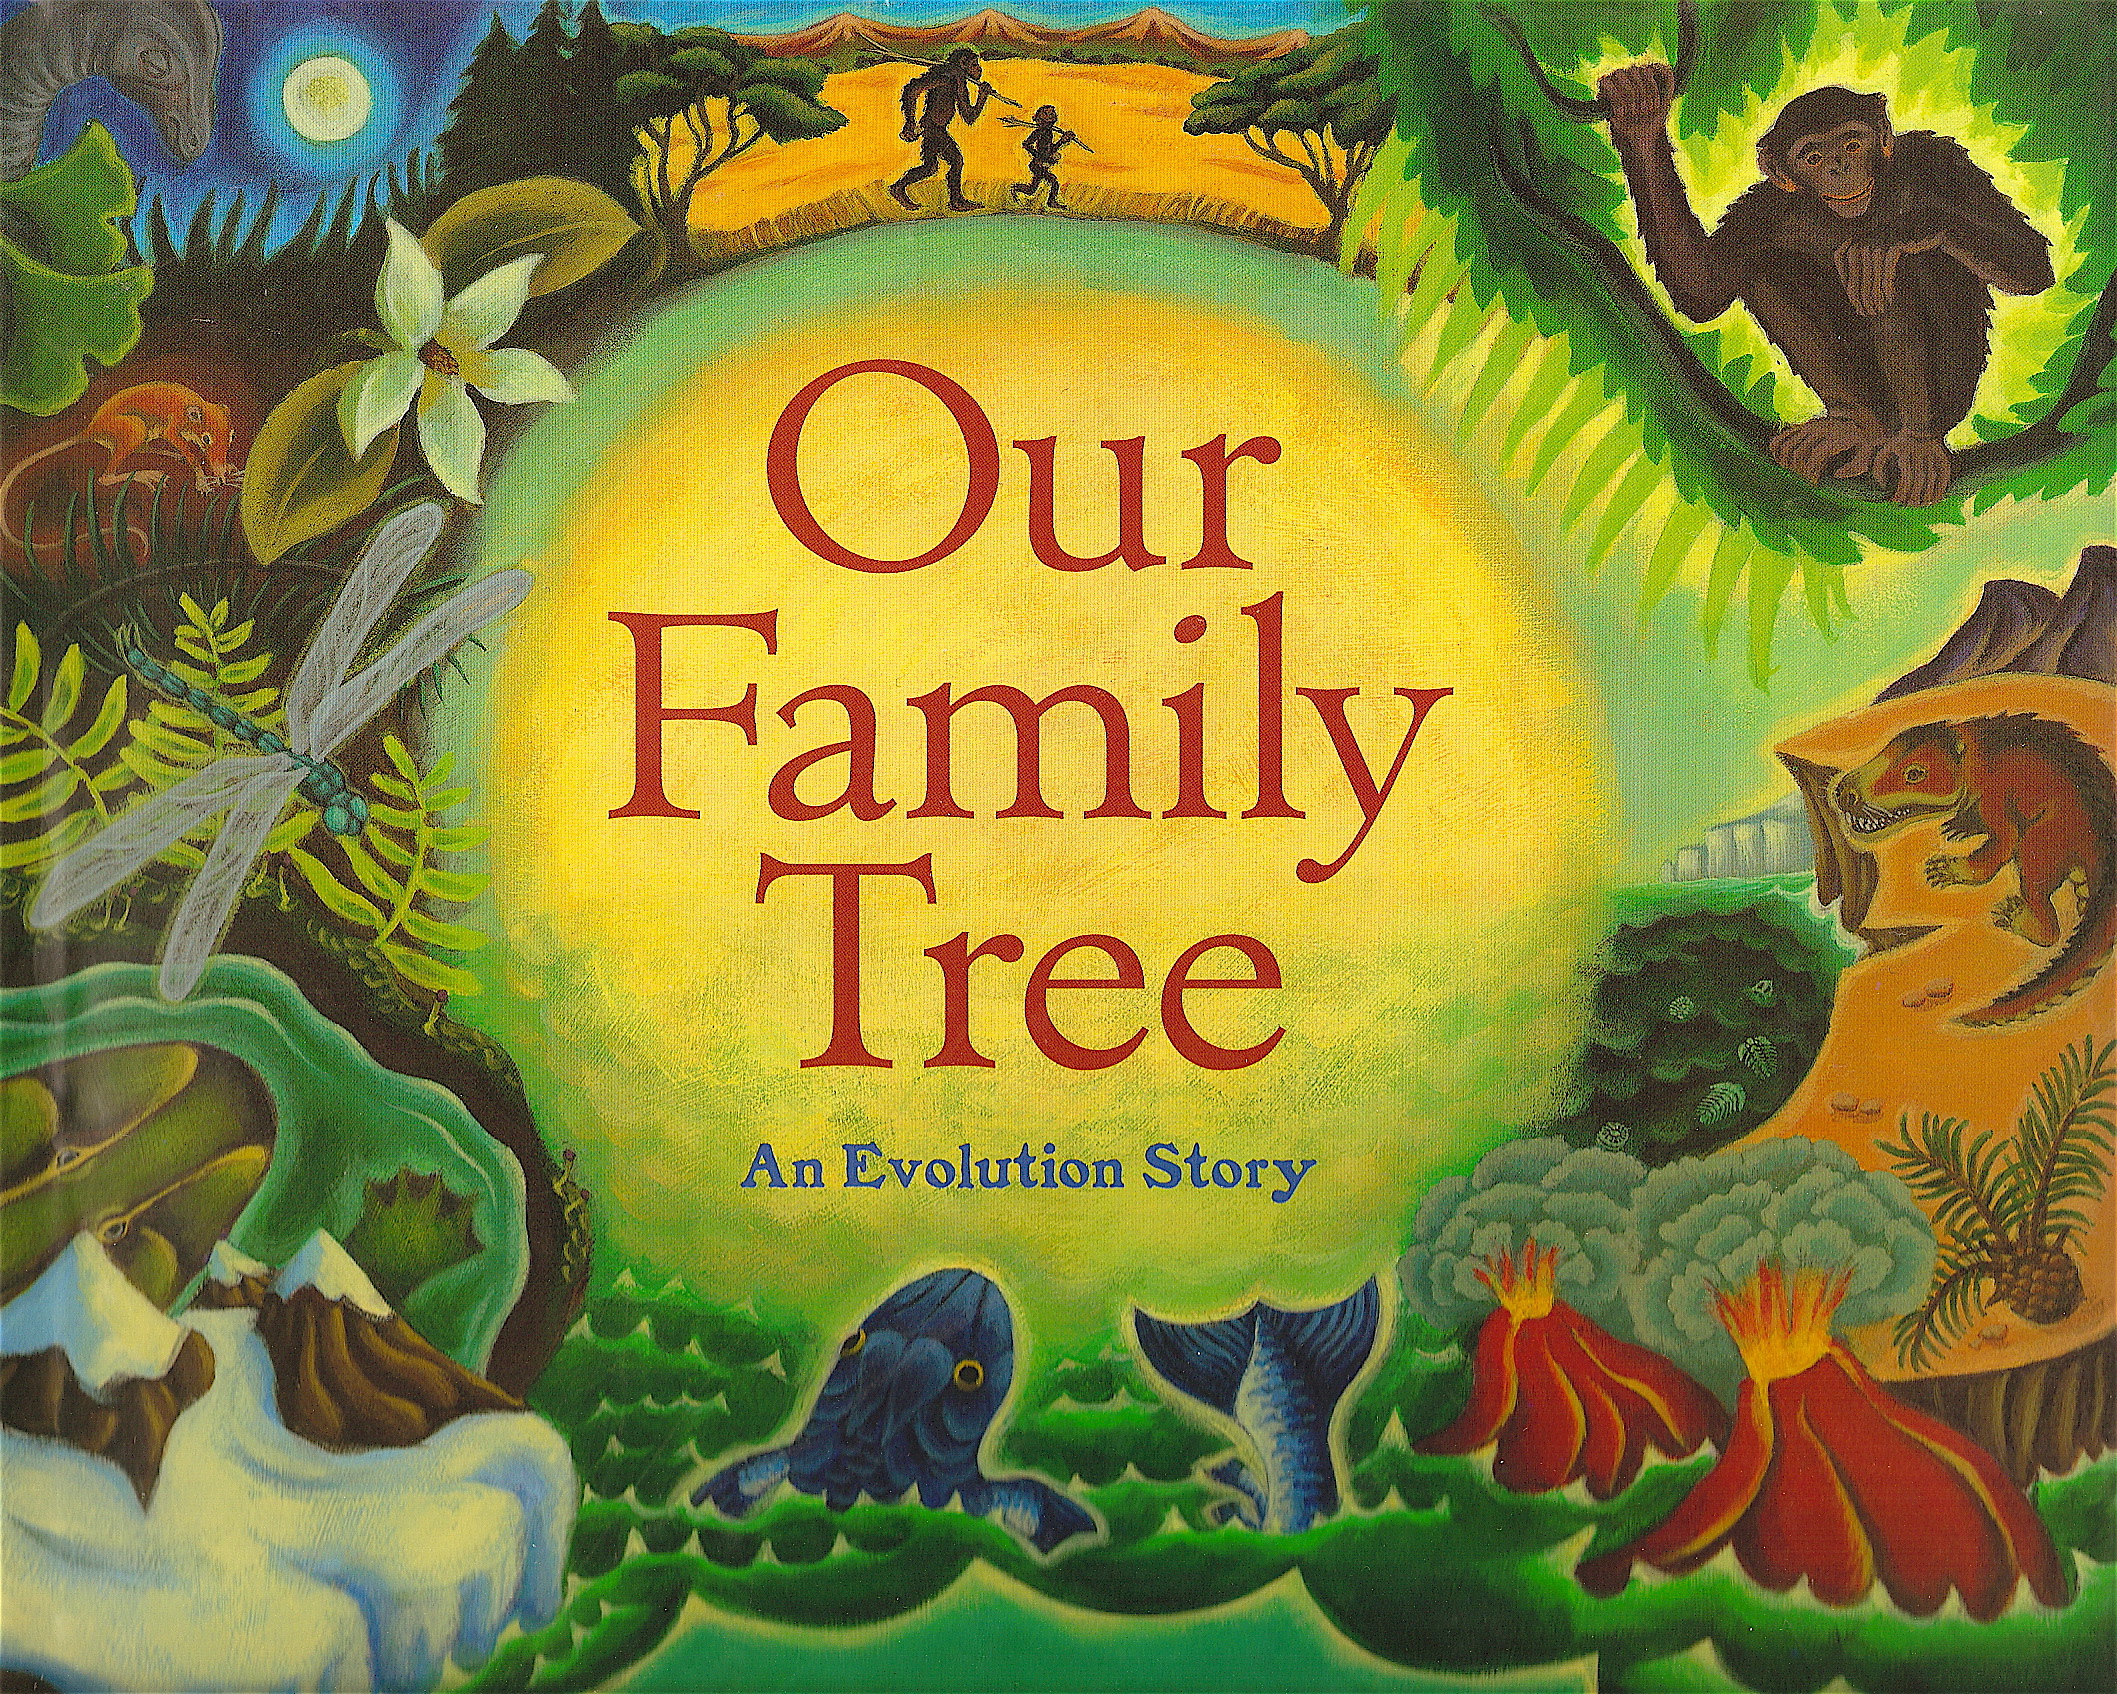 Our Family Tree: A History of Our Family: Poplar Books